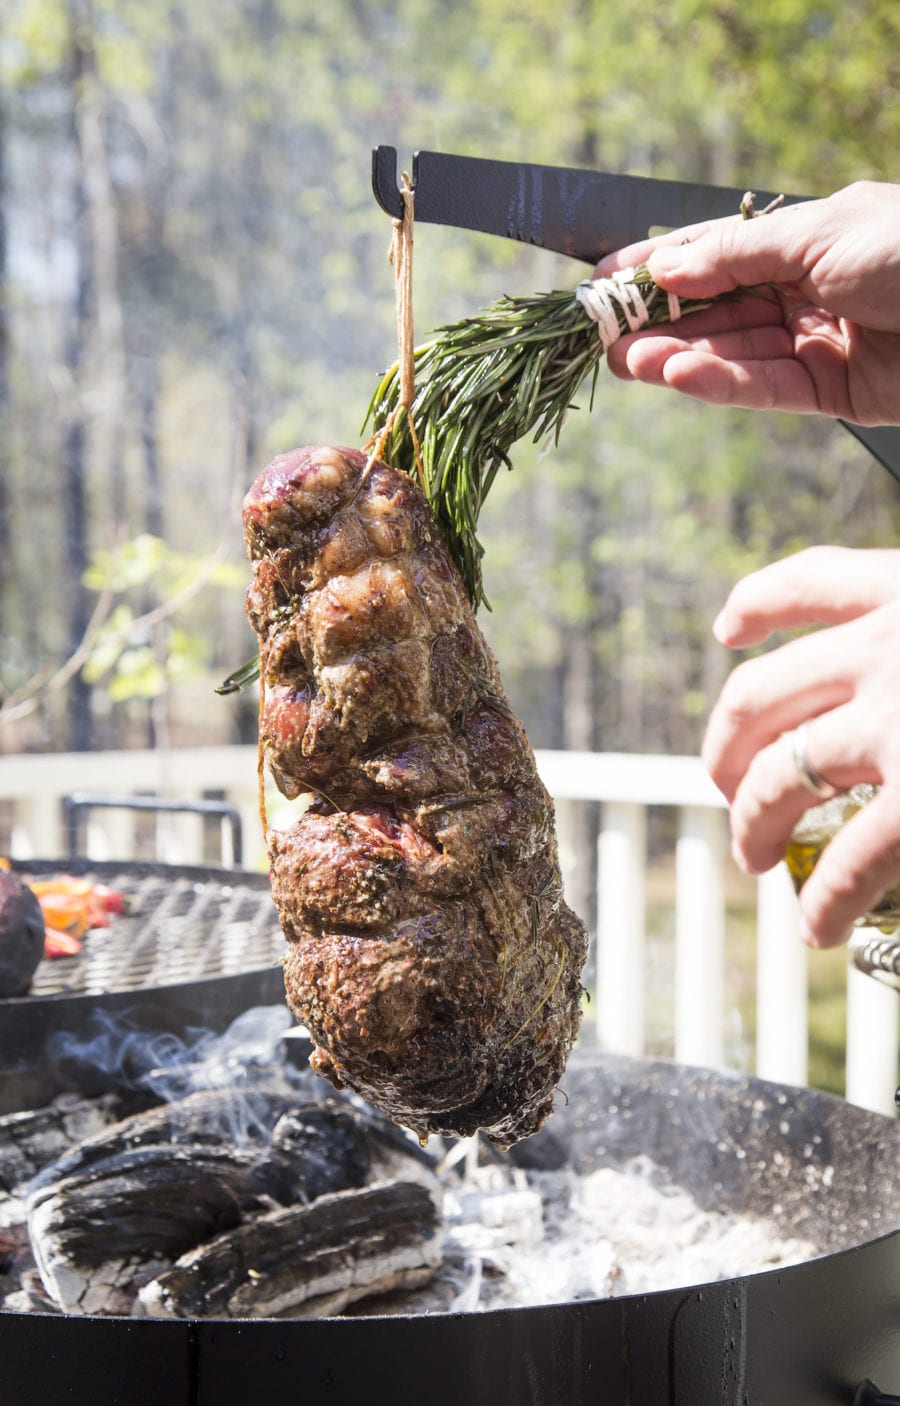 Lamb, a dish from this dinner party menu, being cooked over a grill. 